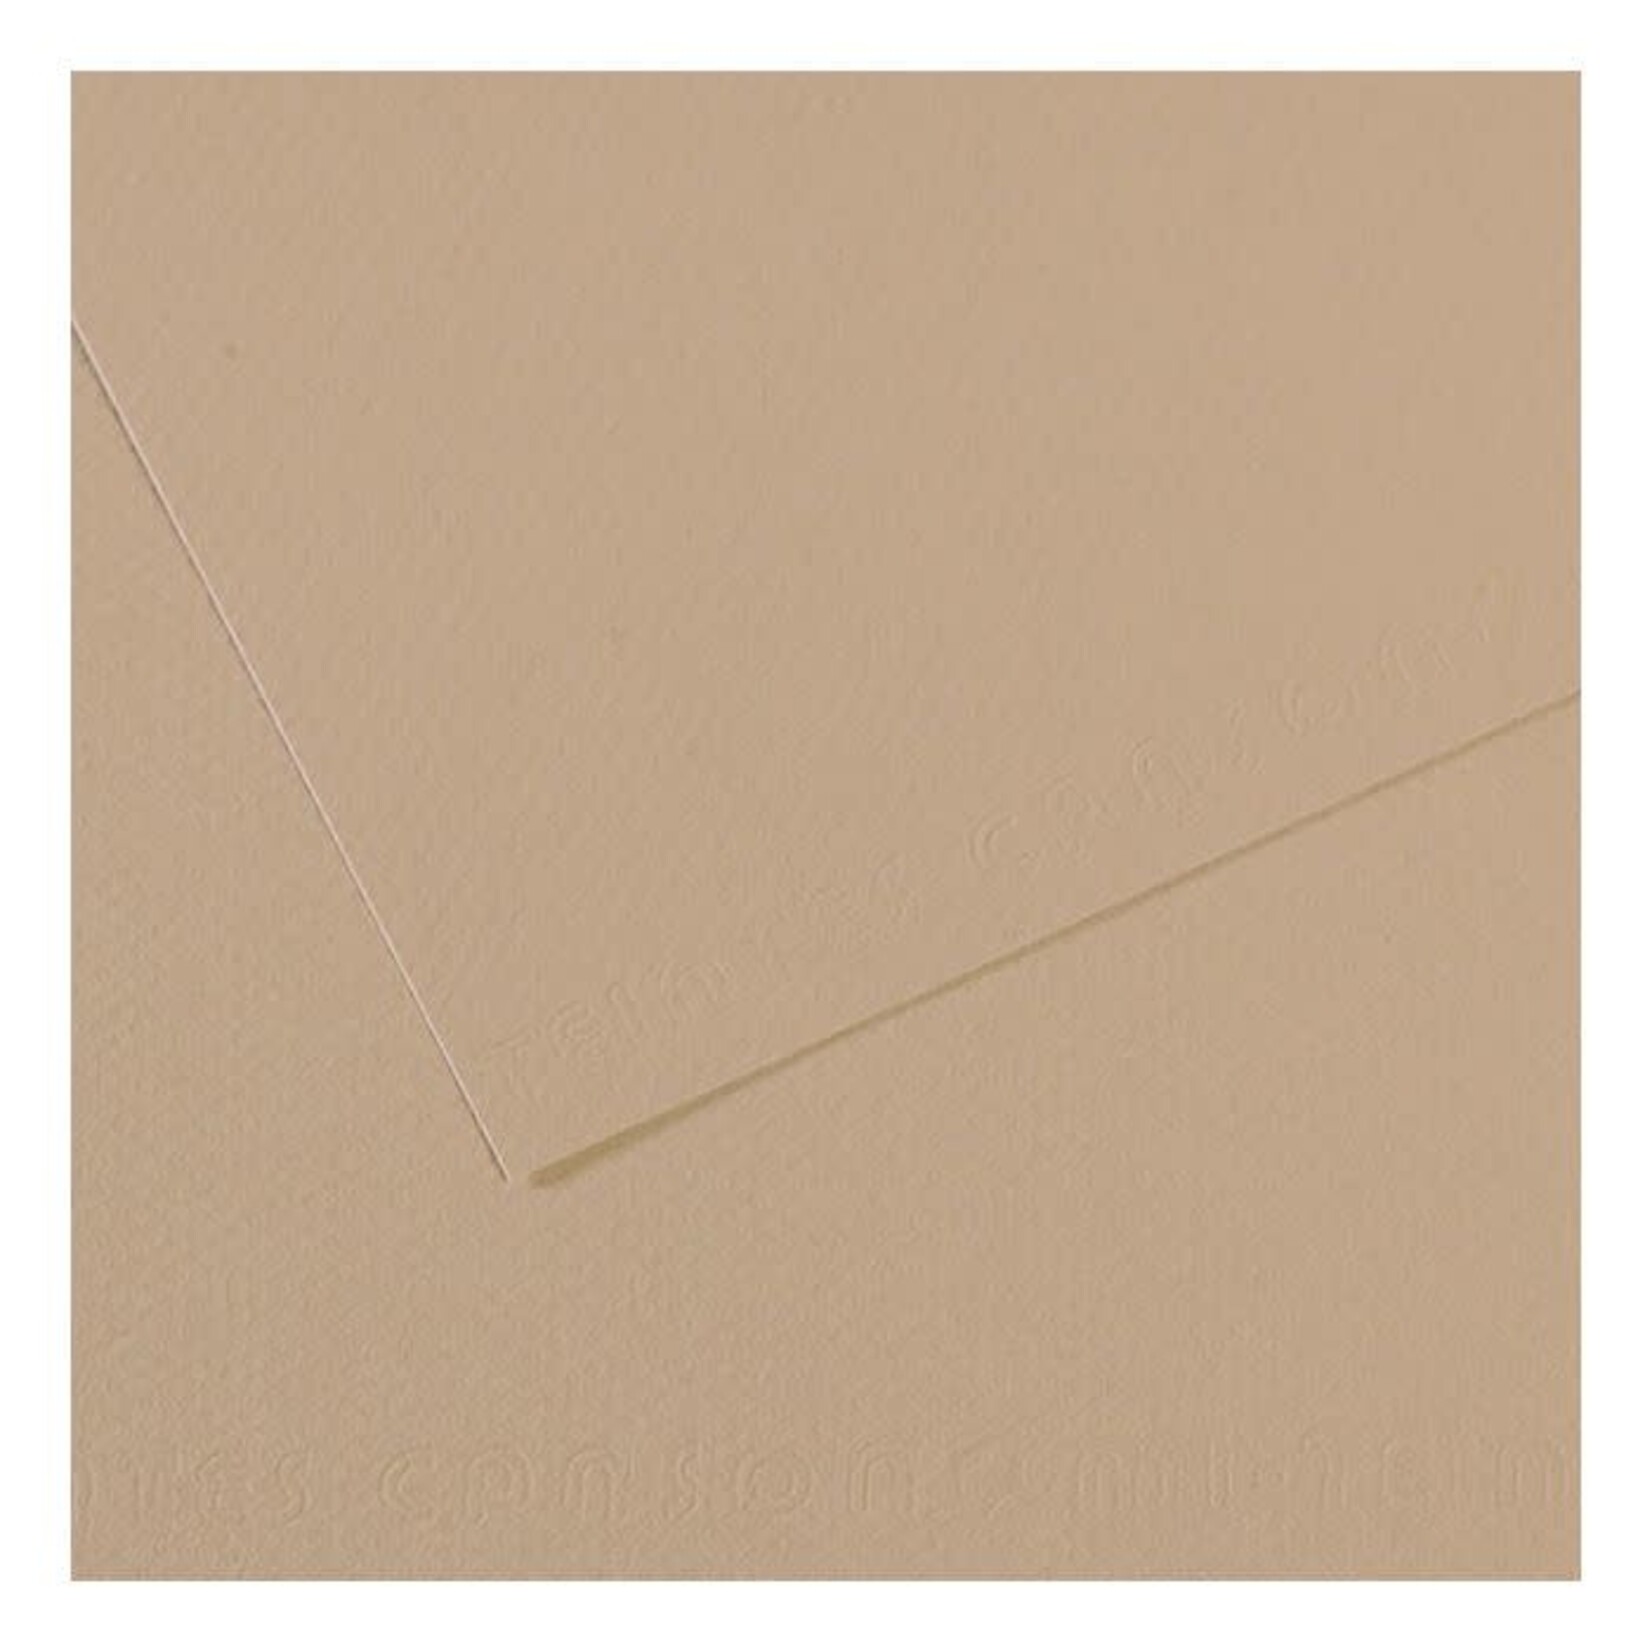 Canson Mi-Teintes Paper Sheets, 8-1/2'' x 11'', Pearl